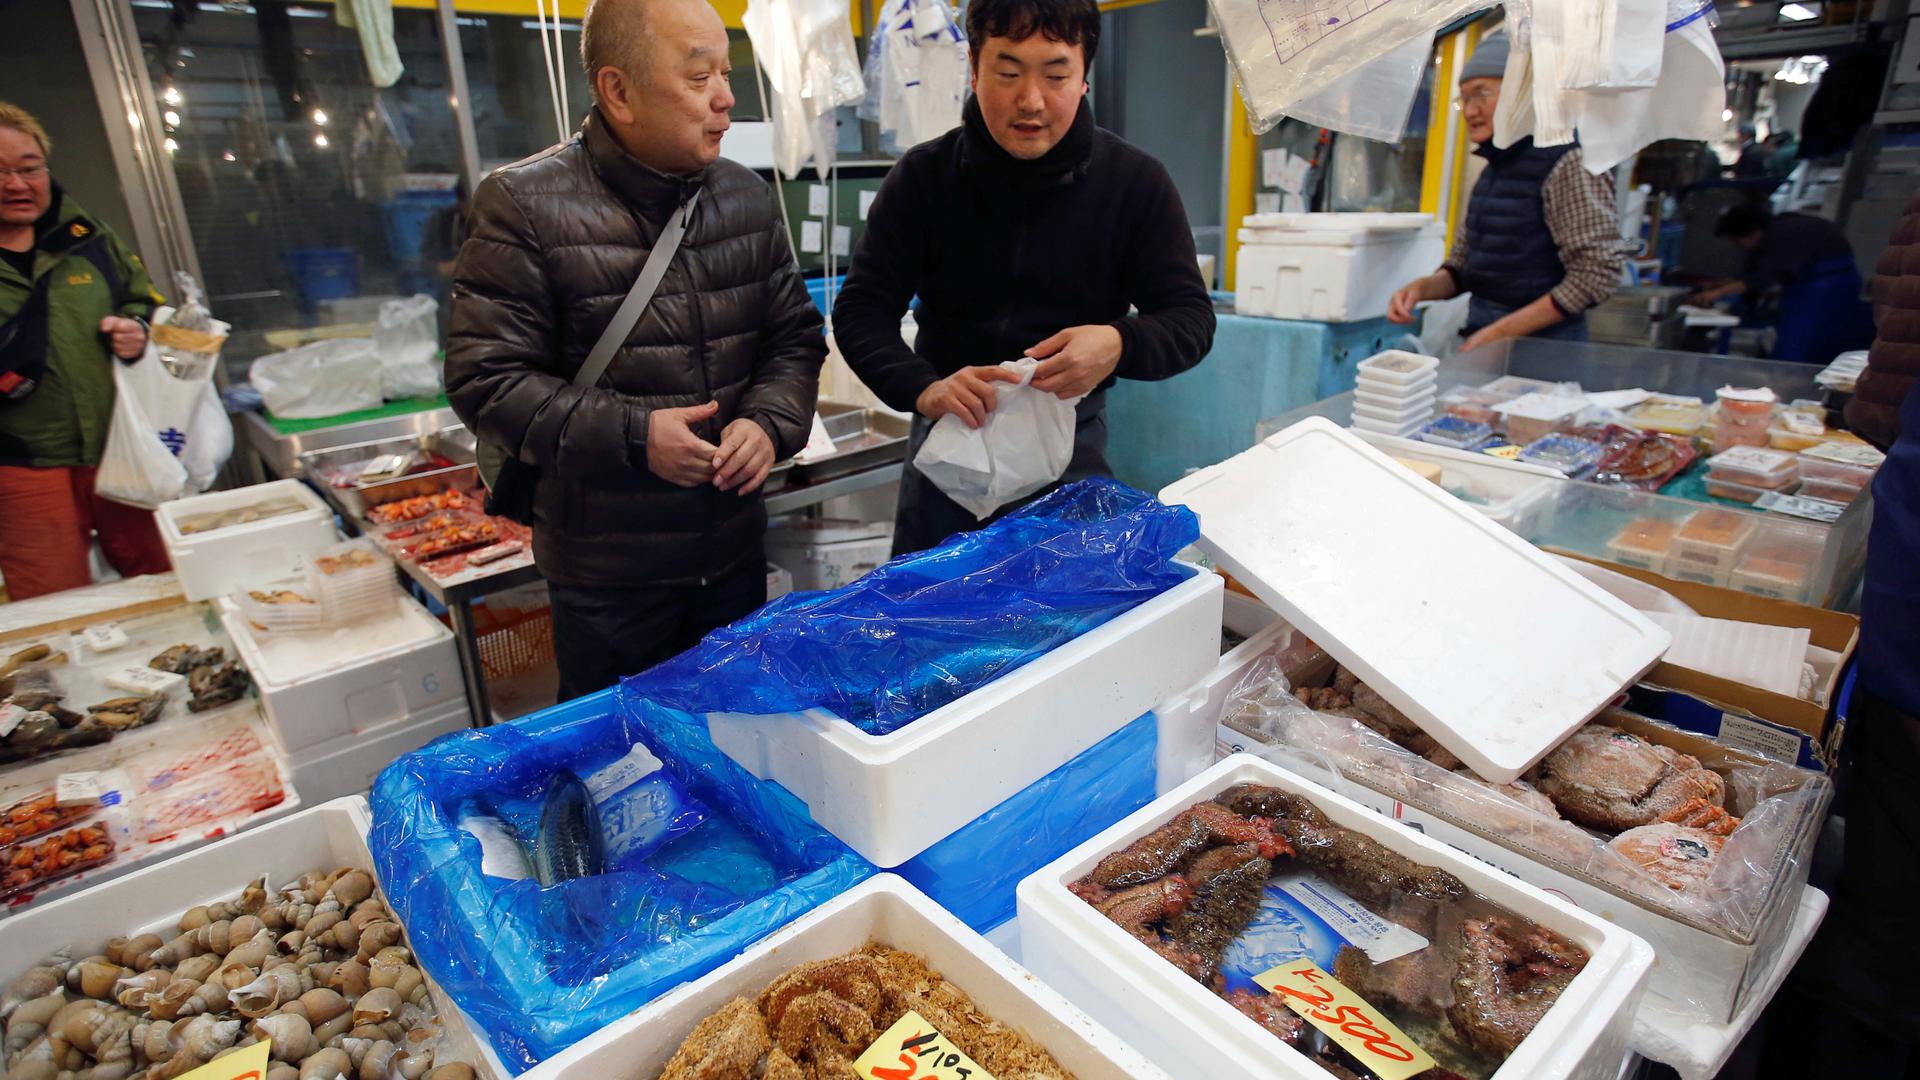 Two men stand near fish in bins at fish market.